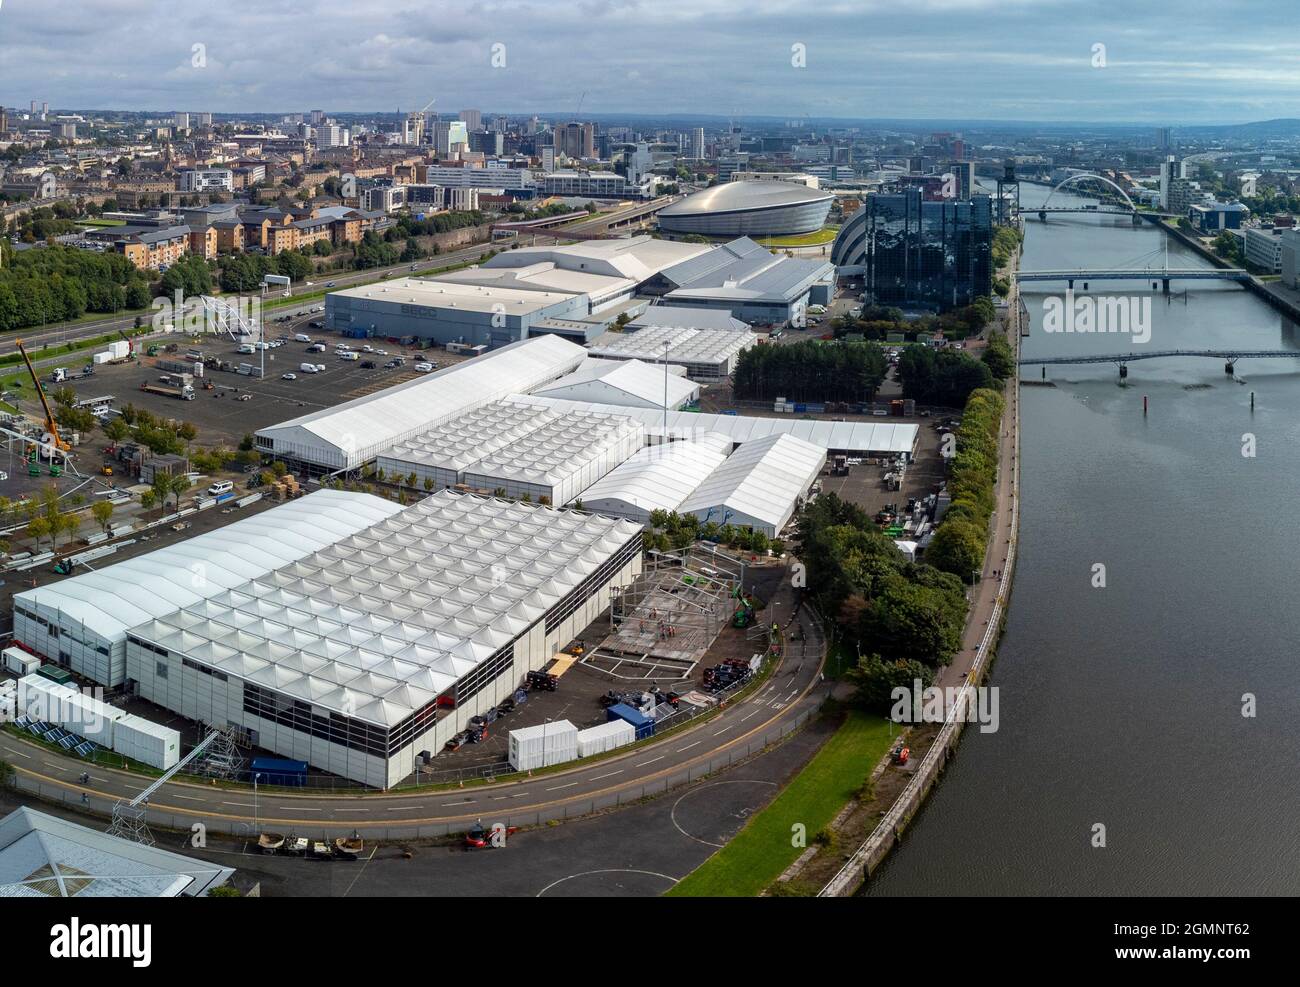 Glasgow, Scotland, UK. 20th September 2021. Aerial views of the site of the COP26 international climate change conference and summit to be held in Glasgow during November 2021. The site is beside the River Clyde at the Scottish Event Campus and large temporary structures can be seen being erected to house the tens of thousands of delegates, heads of state and journalists who will attend the two week event.  Iain Masterton/Alamy Live News. Stock Photo